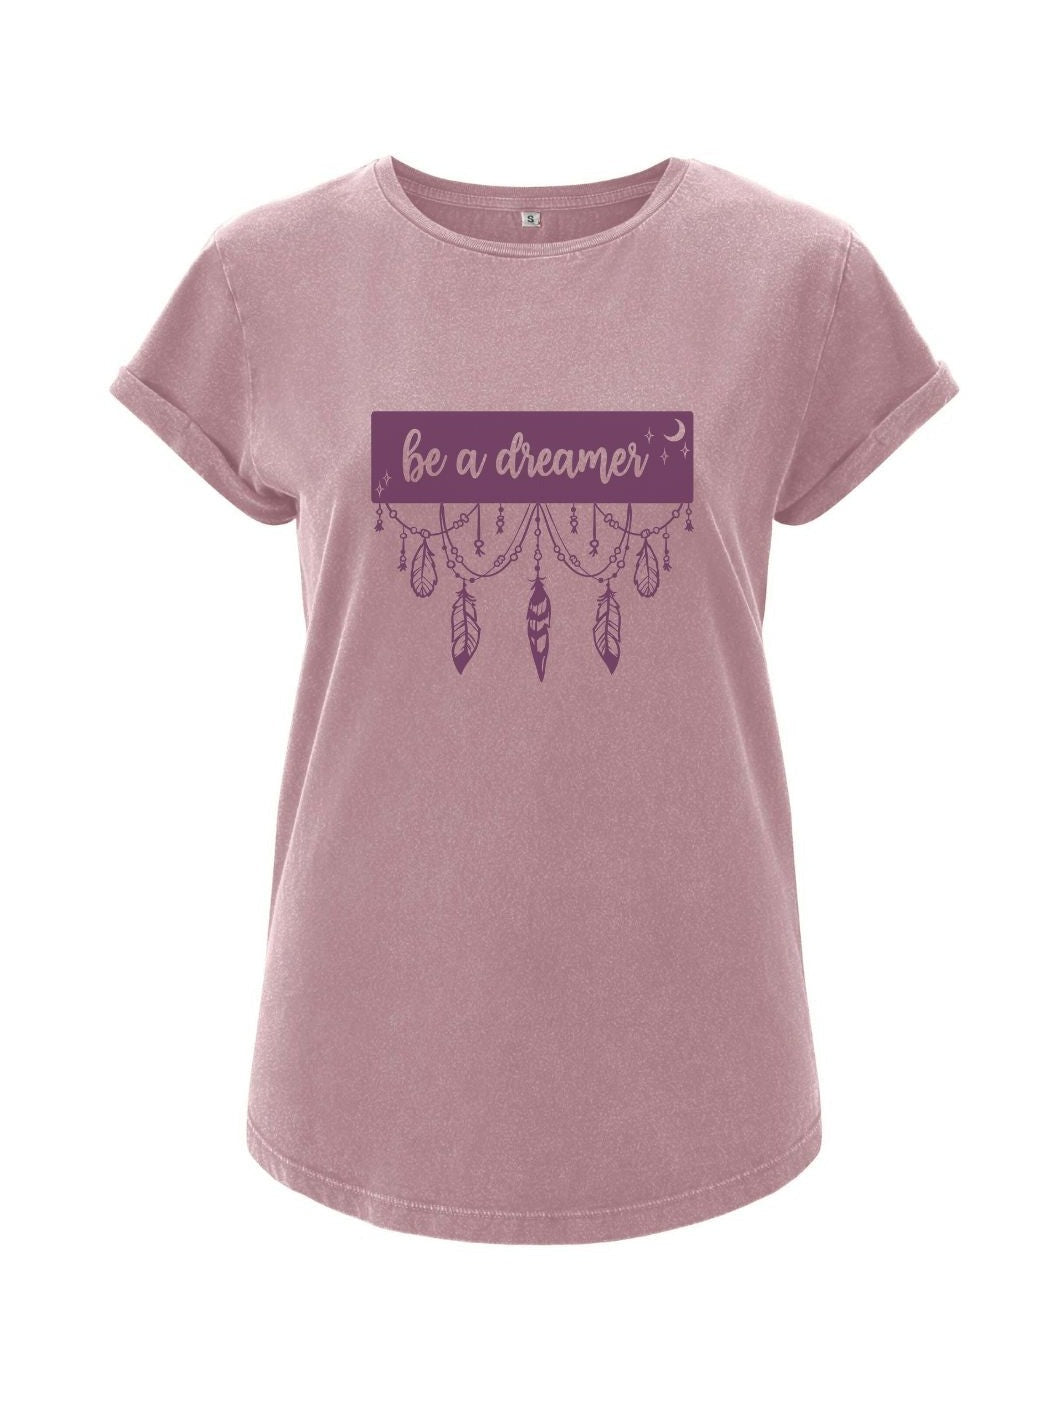 Damen T-Shirt BE A DREAMER rolled arms purple rose